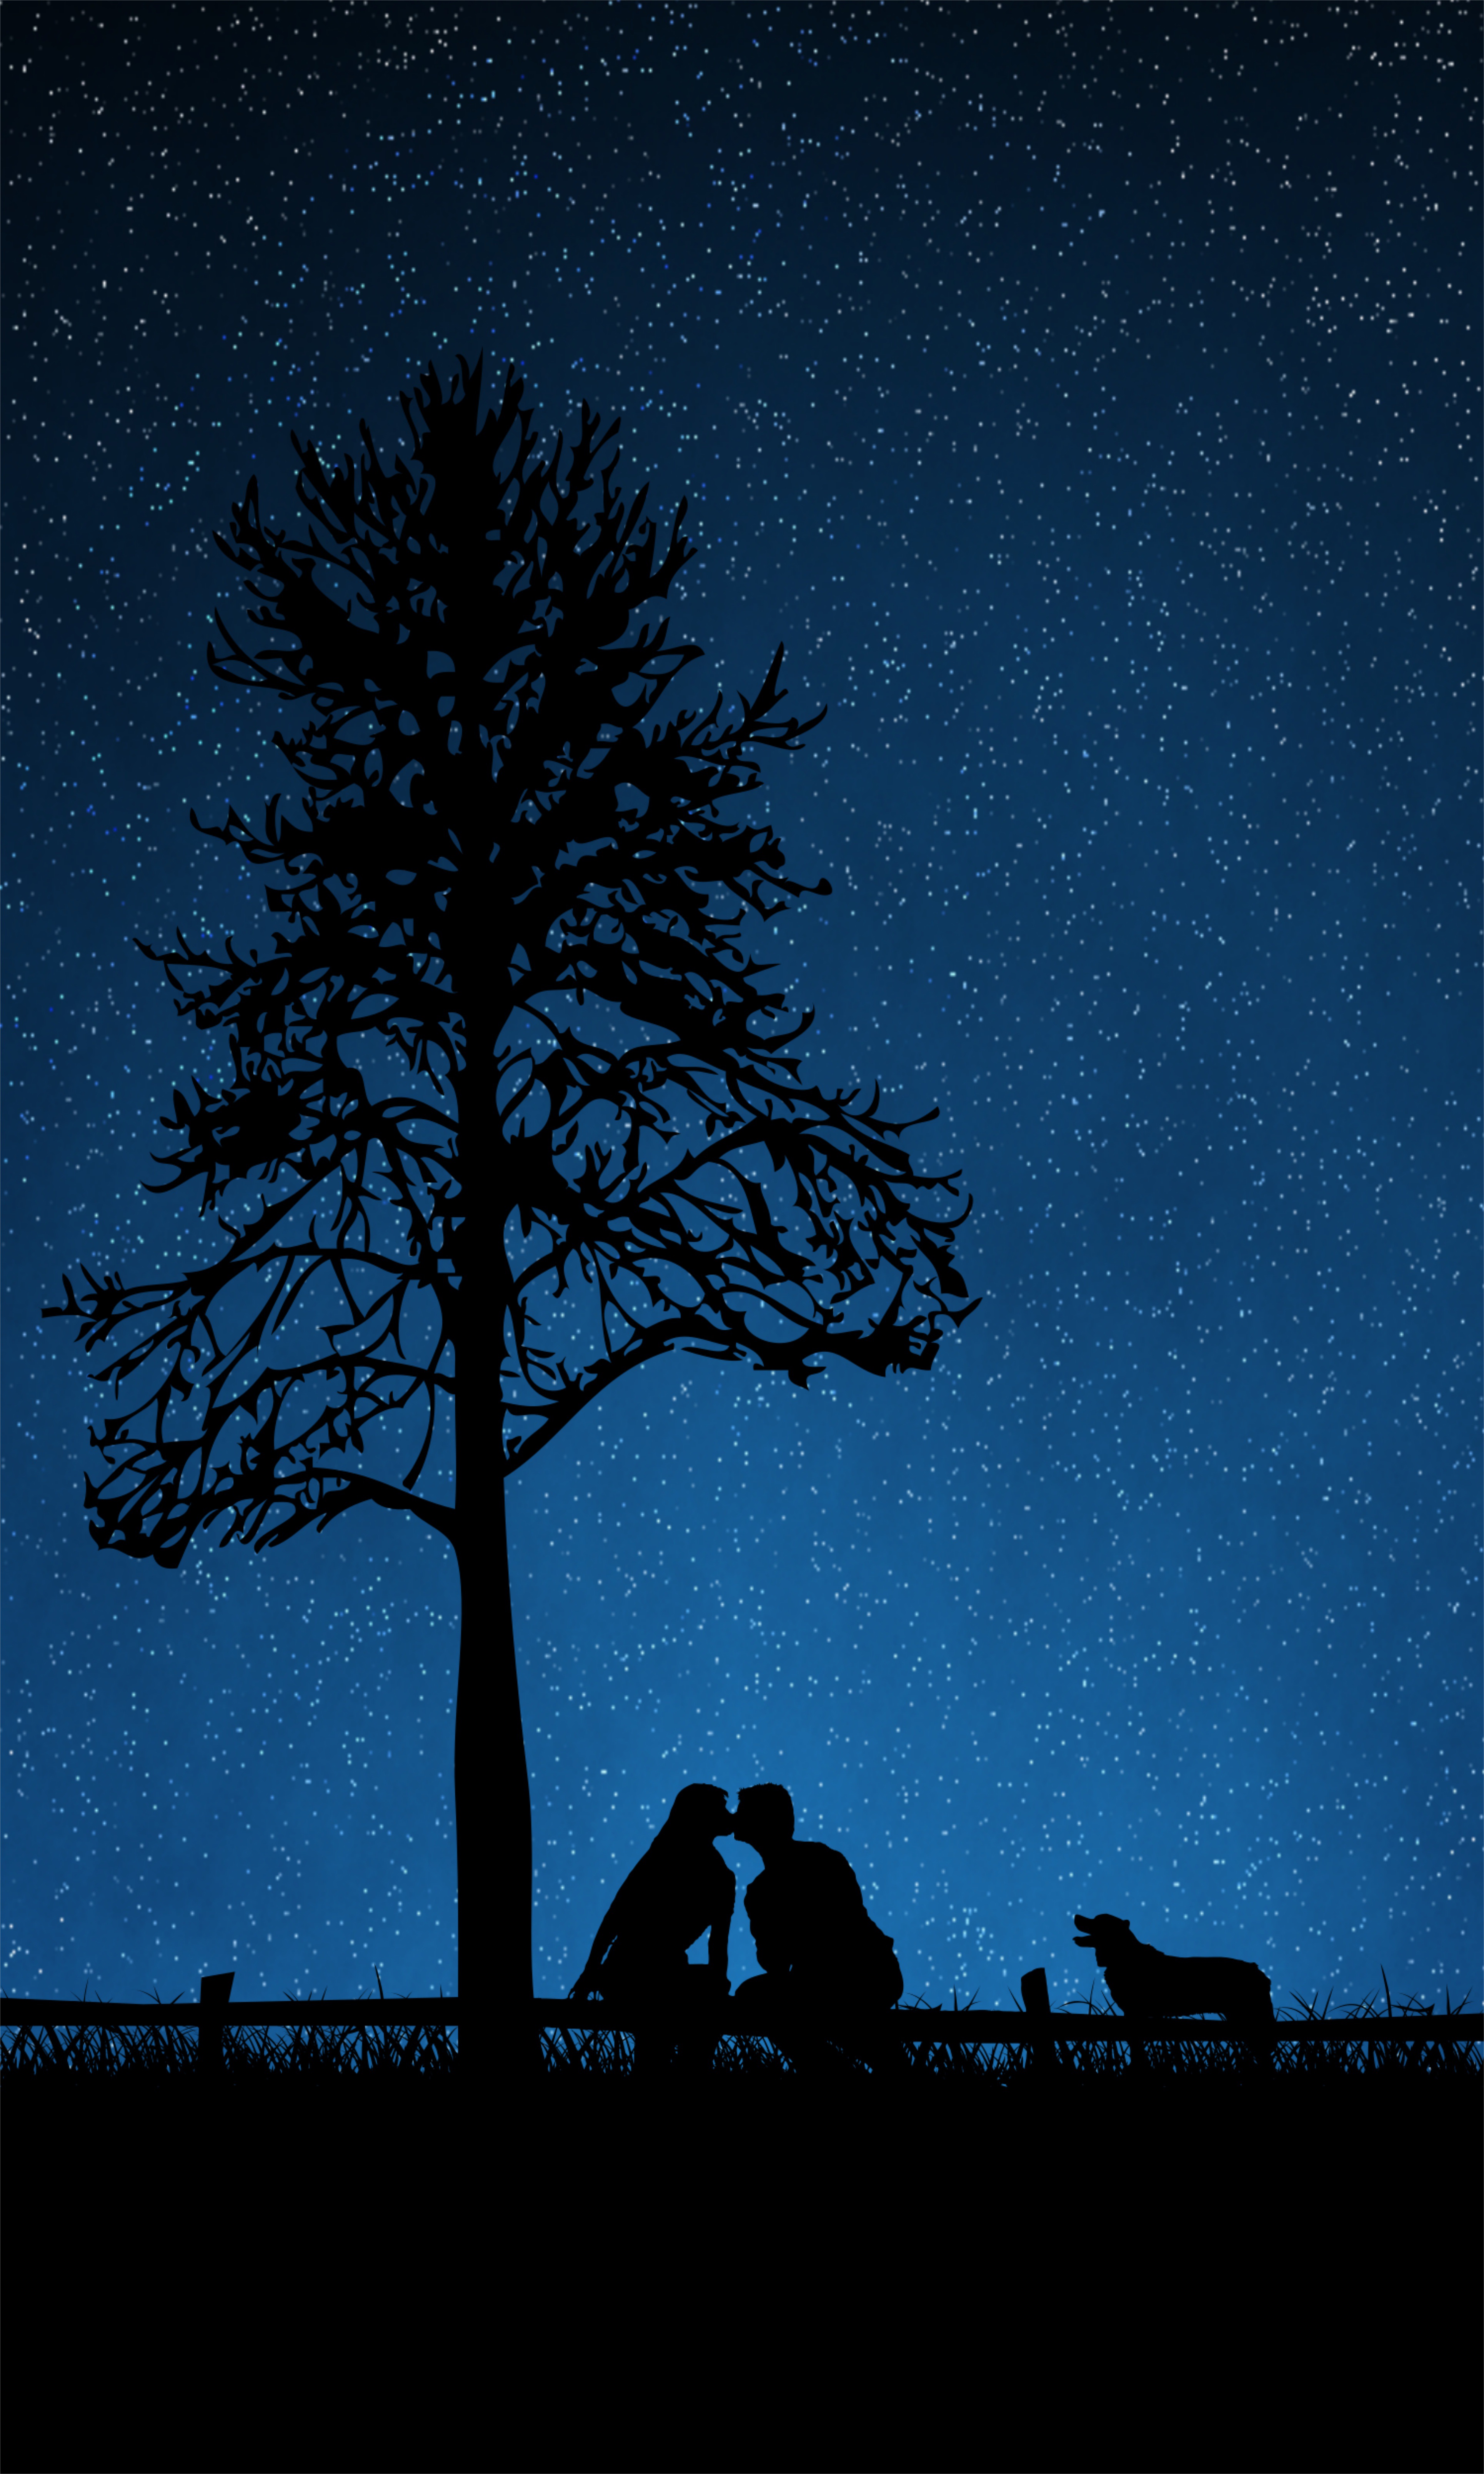 couple, kiss, pair, love, wood, tree, dog, silhouettes, starry sky